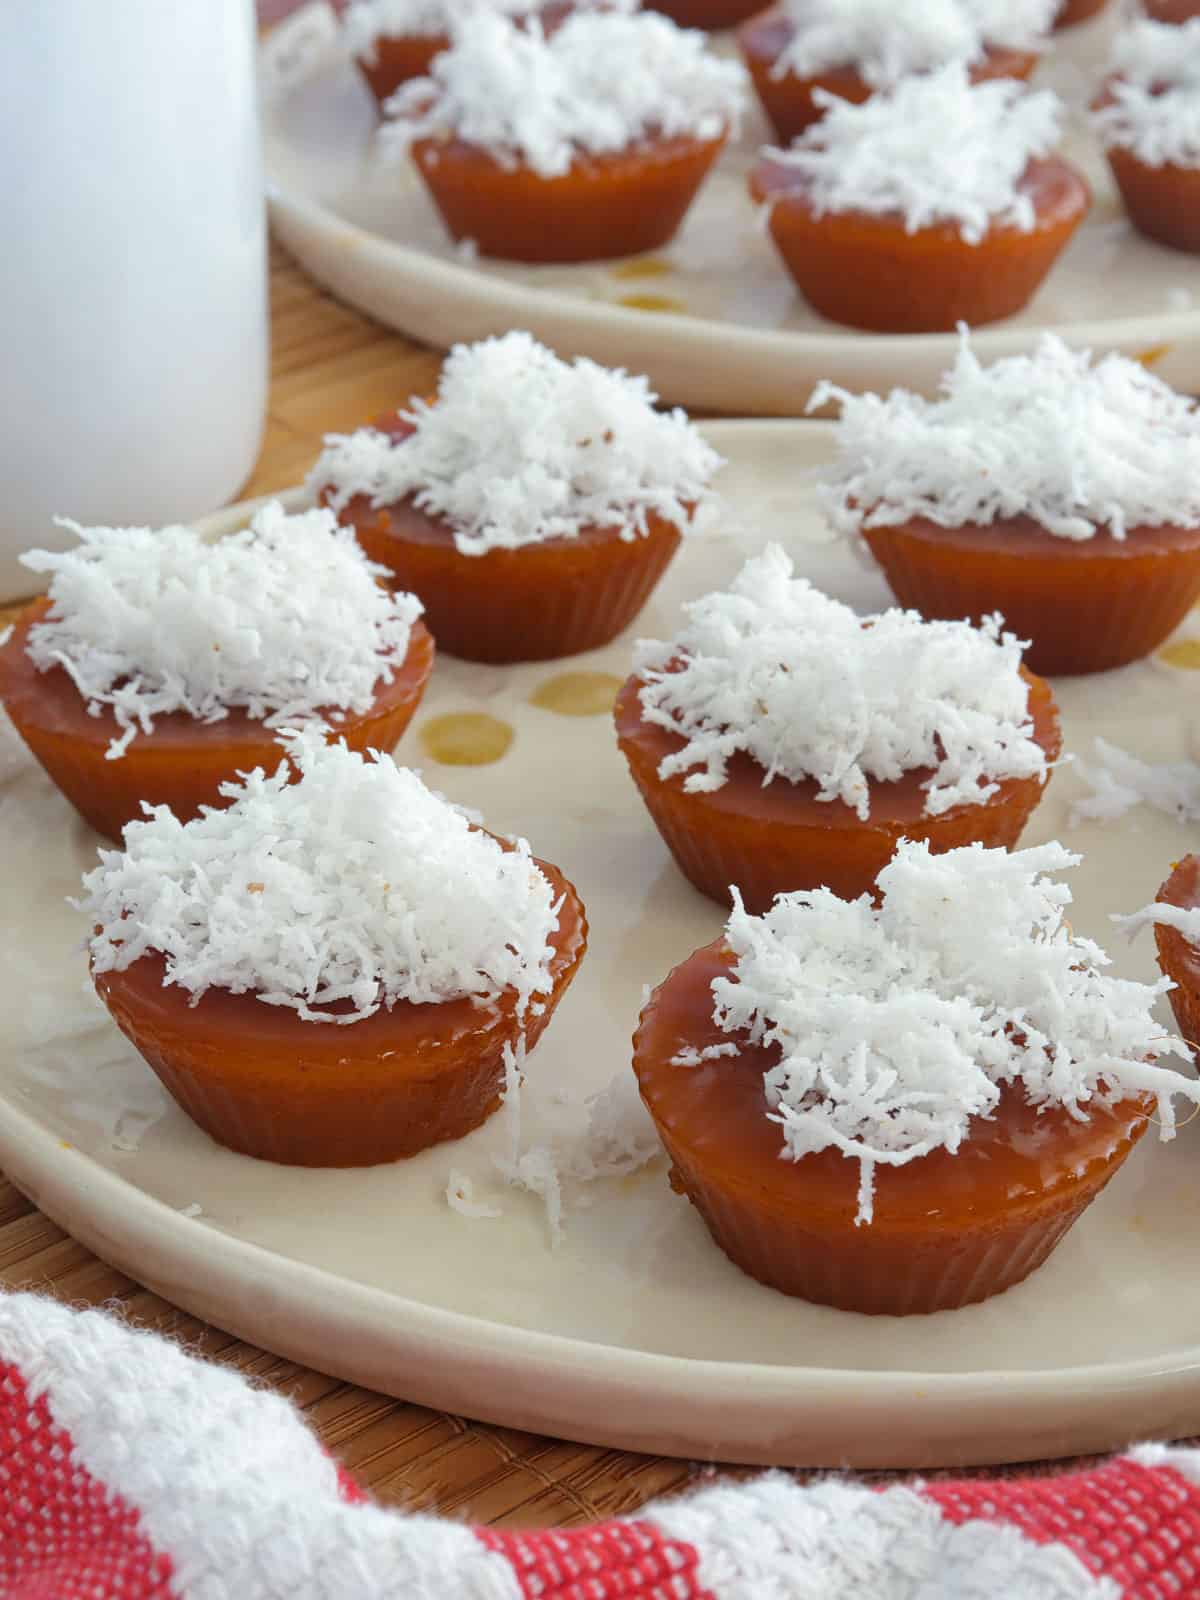 kutsinta with grated coconut topping on white plates.